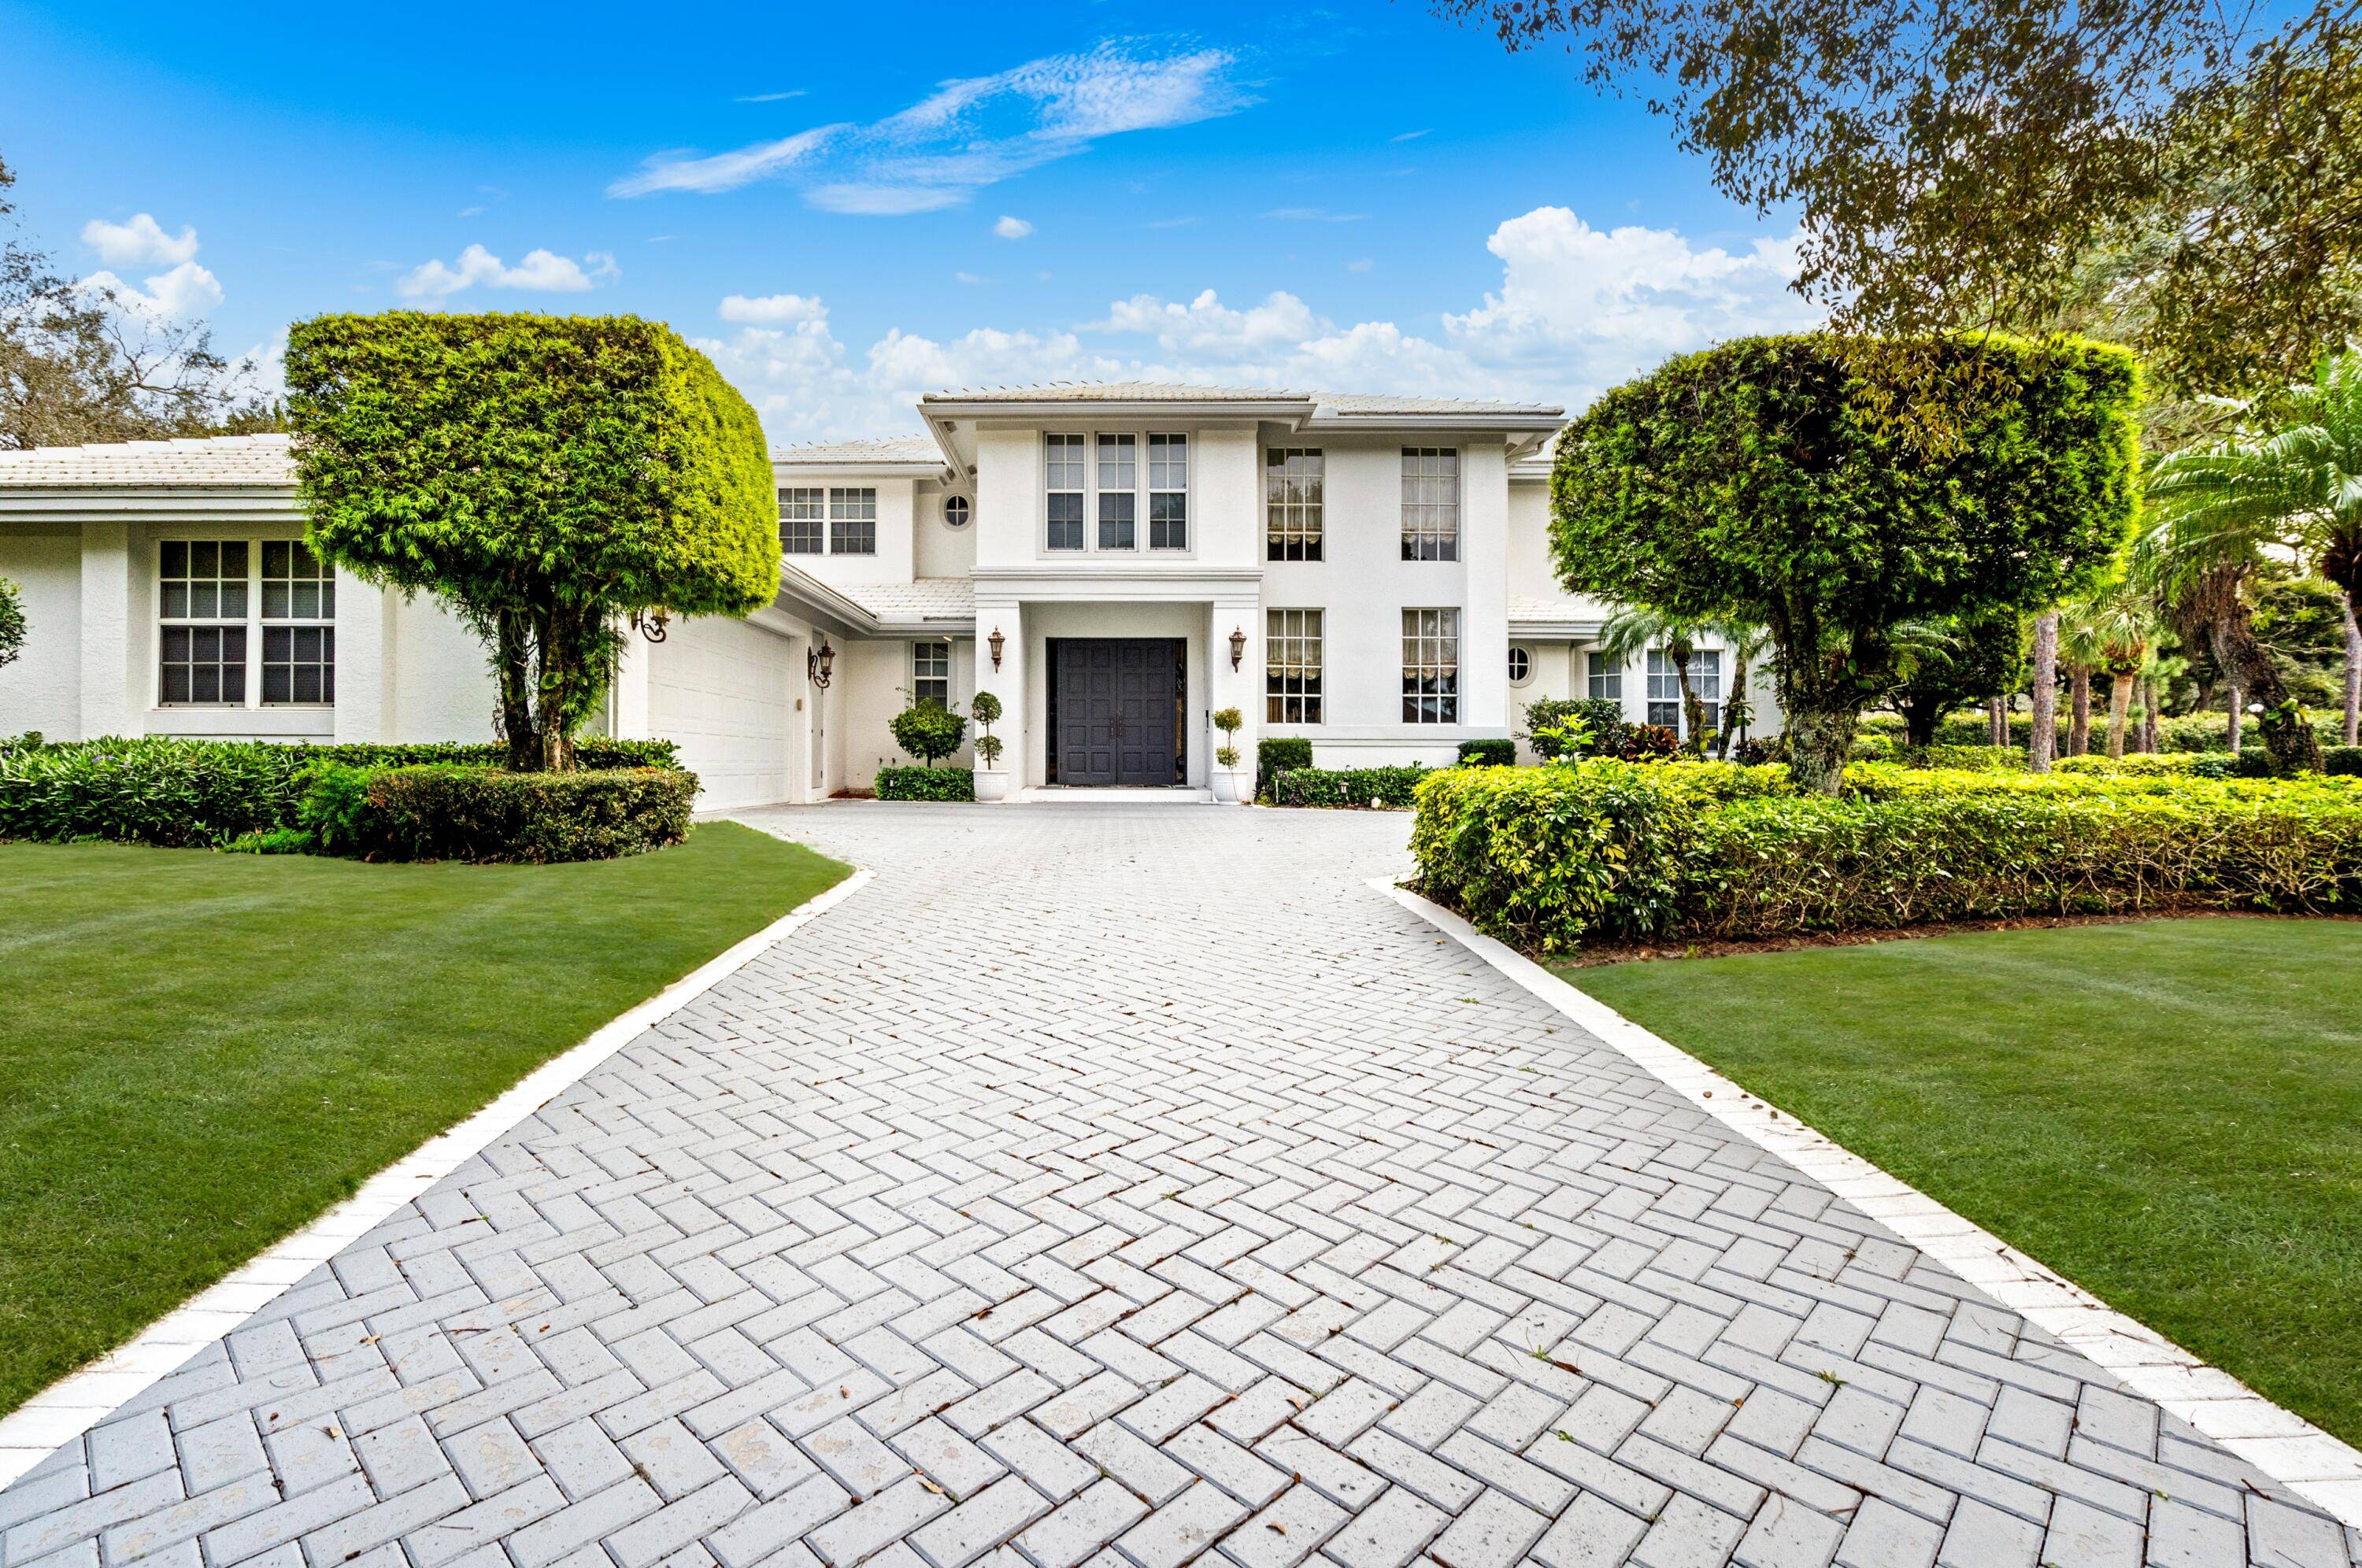 Nestled in the exclusive gated enclave of Les Jardins, this gorgeous estate's premier location offers the best of Boca Raton living.